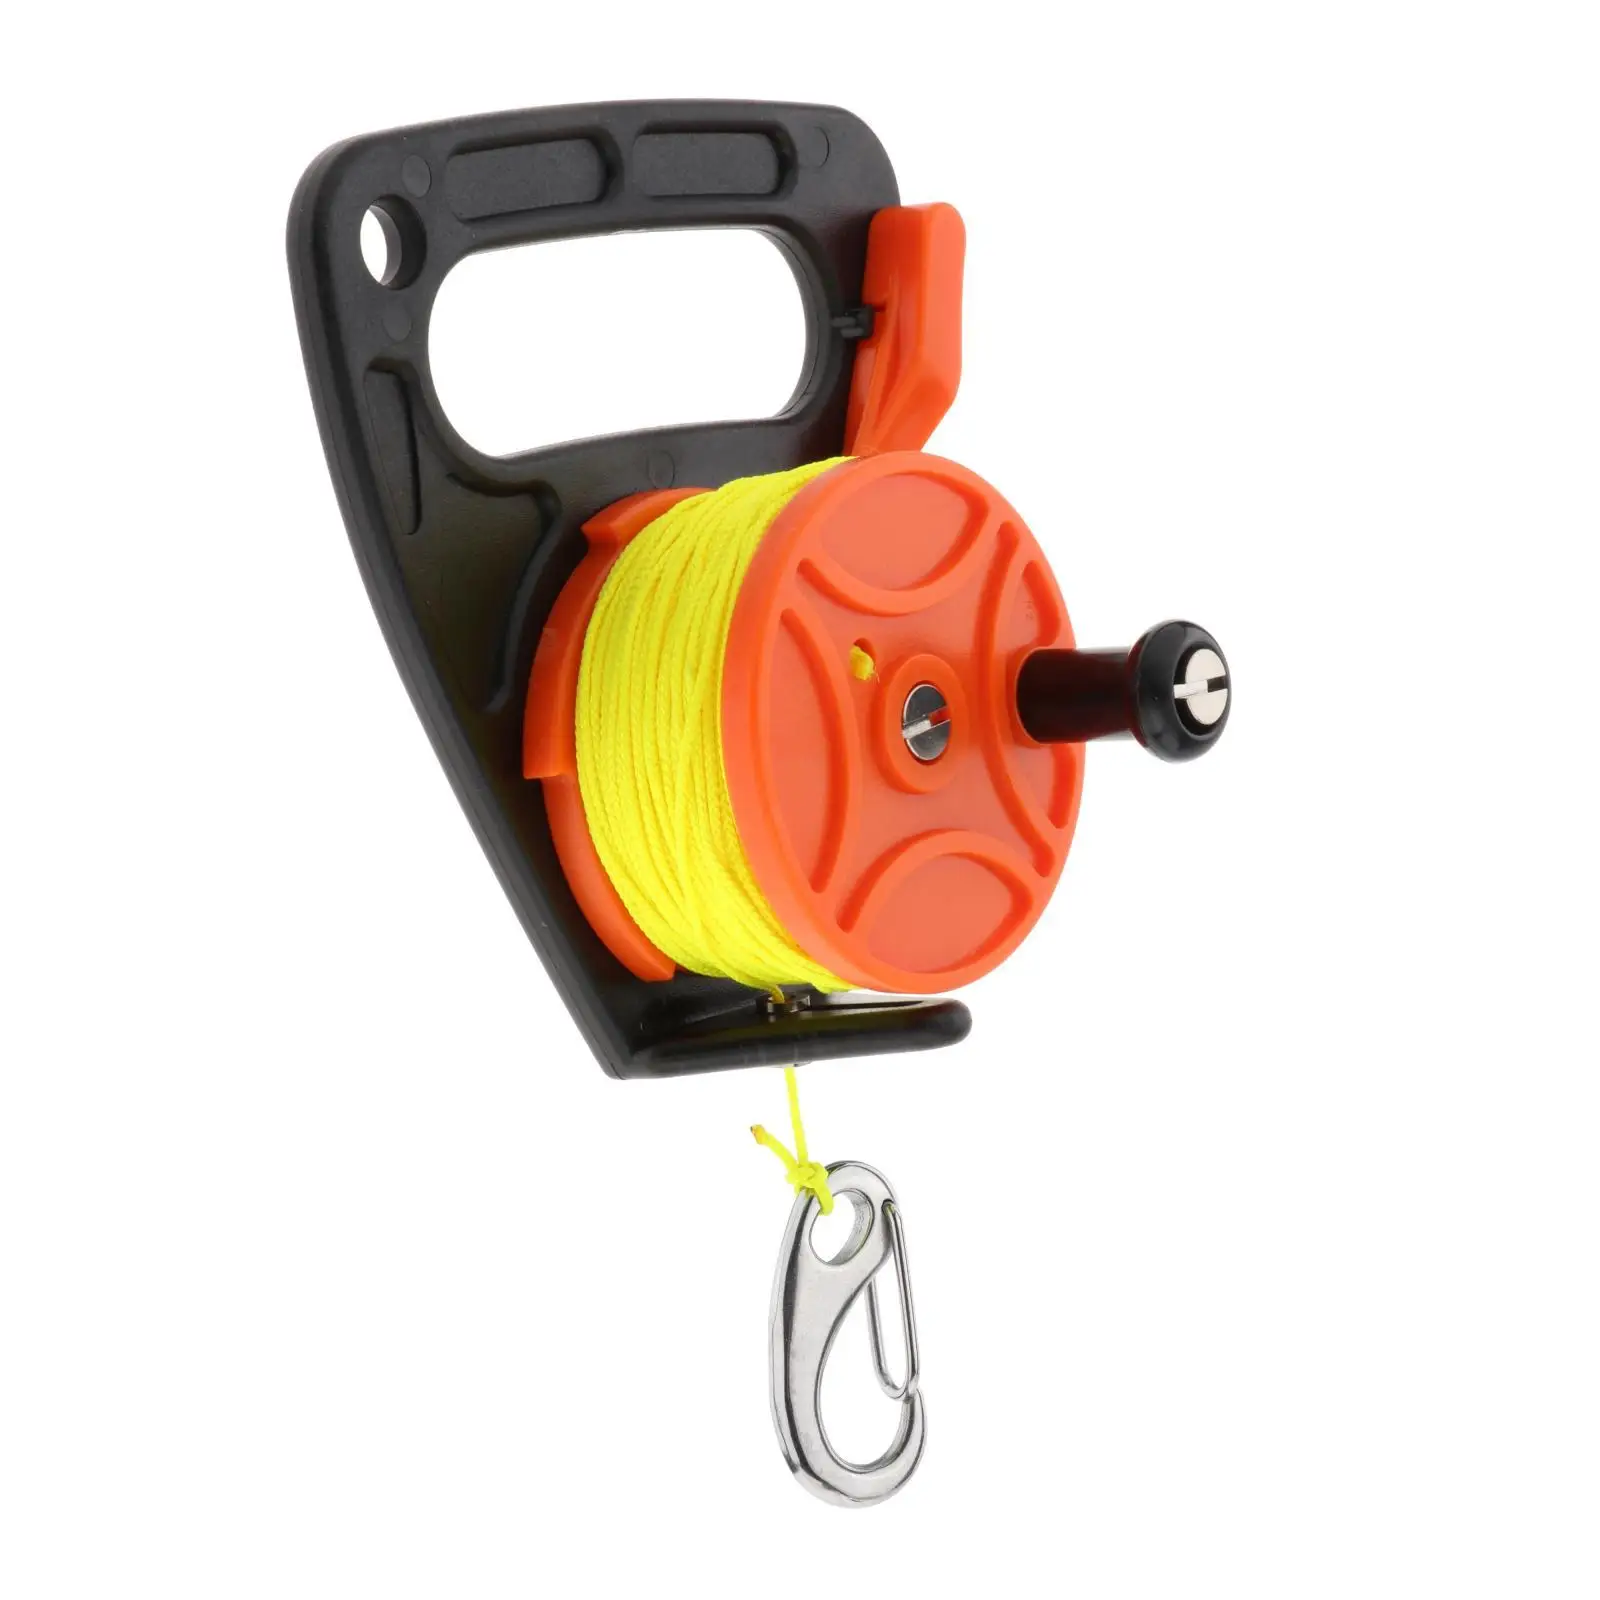 Multi-Purpose Scuba Diving Reel with Handle Equipment for Wreck Exploration Spear Fishing